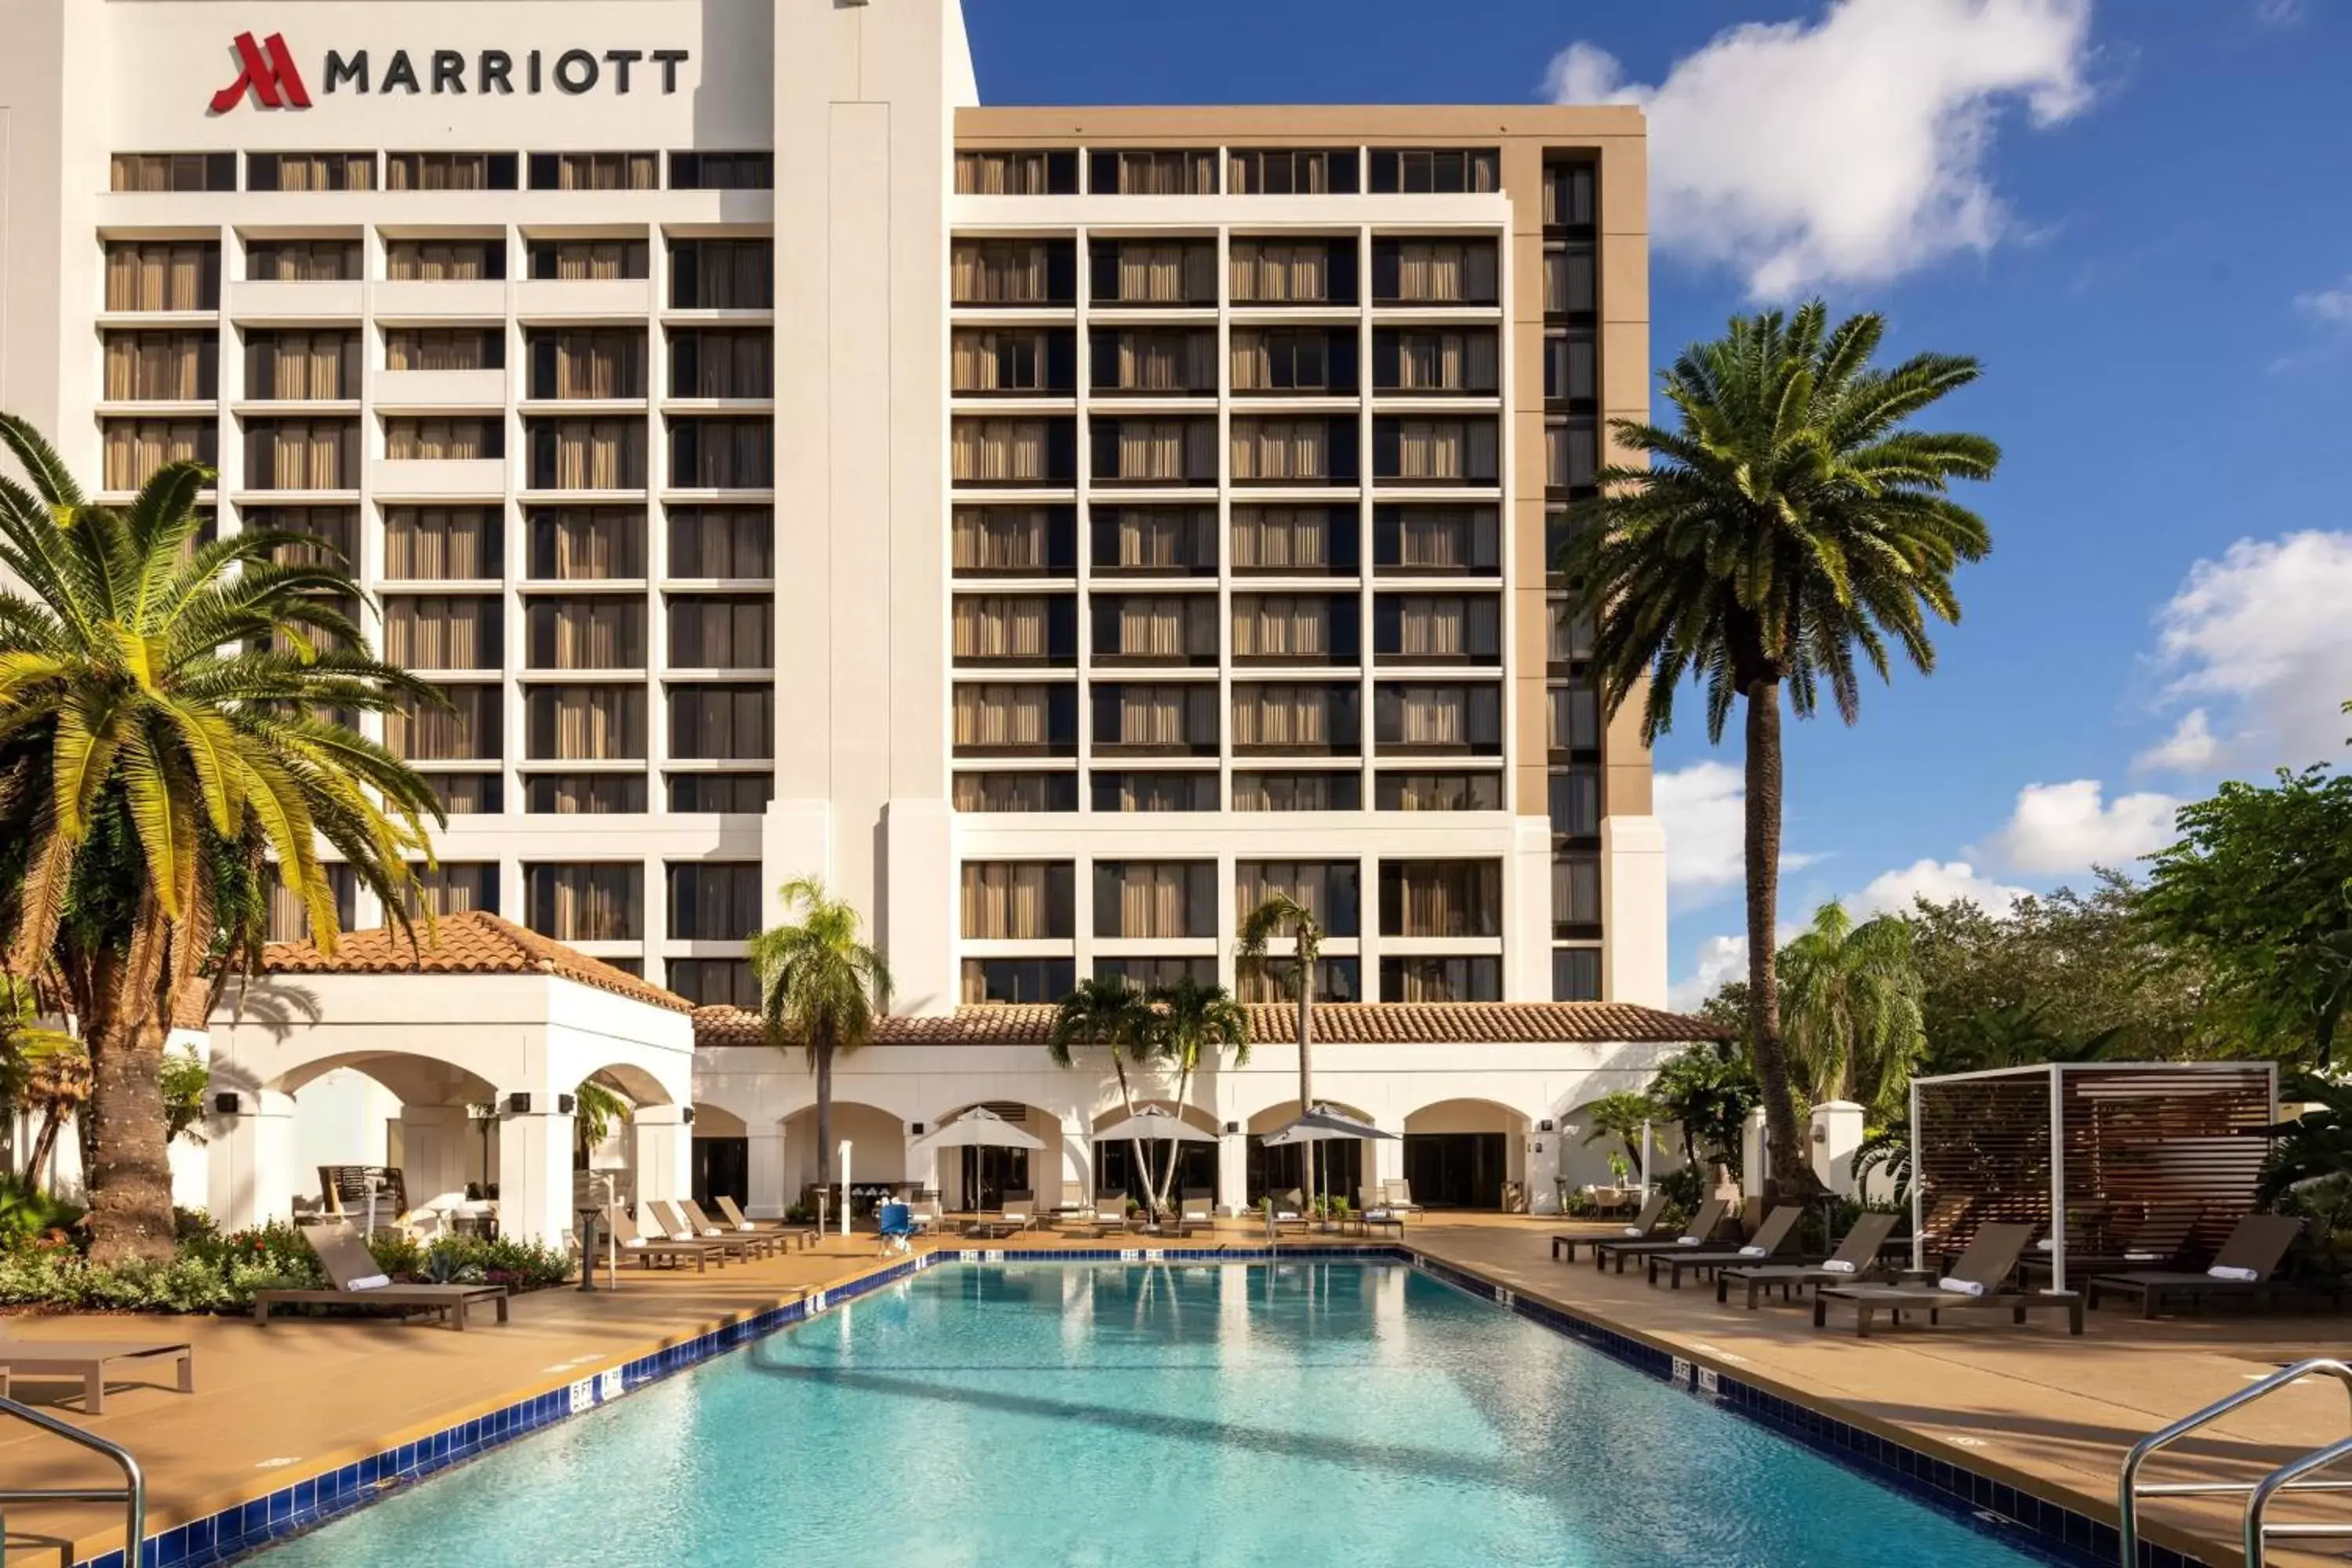 Swimming pool, Property Building in Palm Beach Gardens Marriott